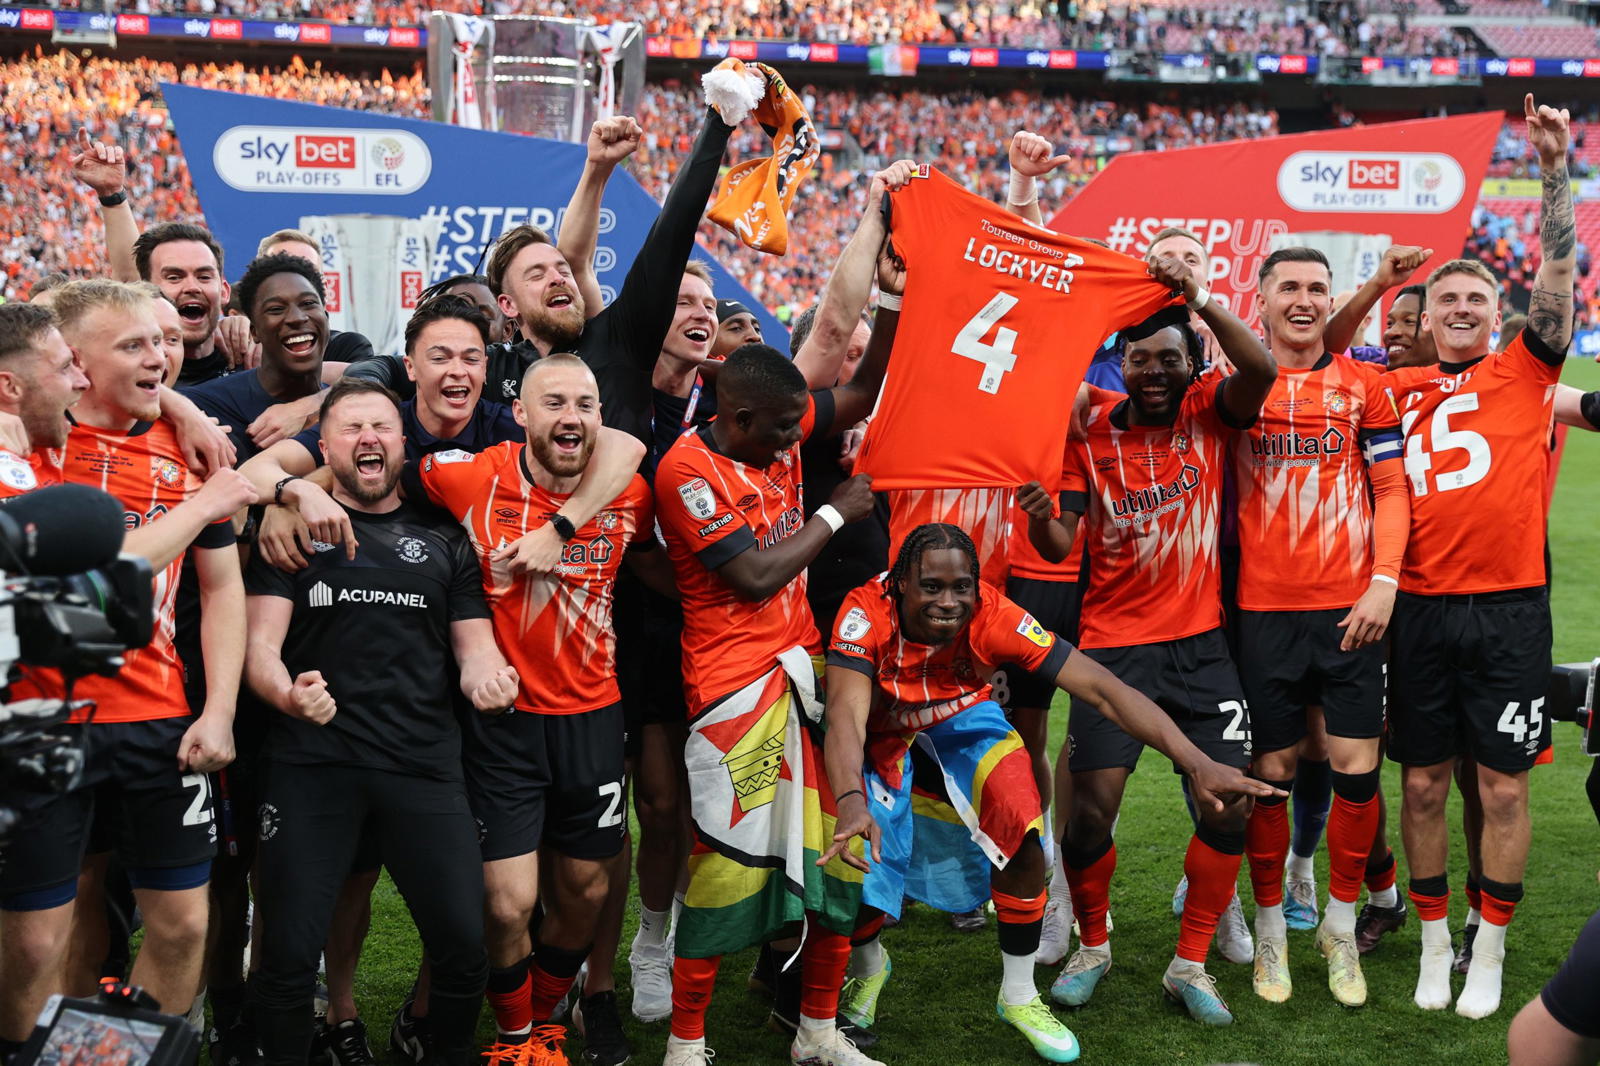 Luton promoted to Premier League after playoff win over Coventry